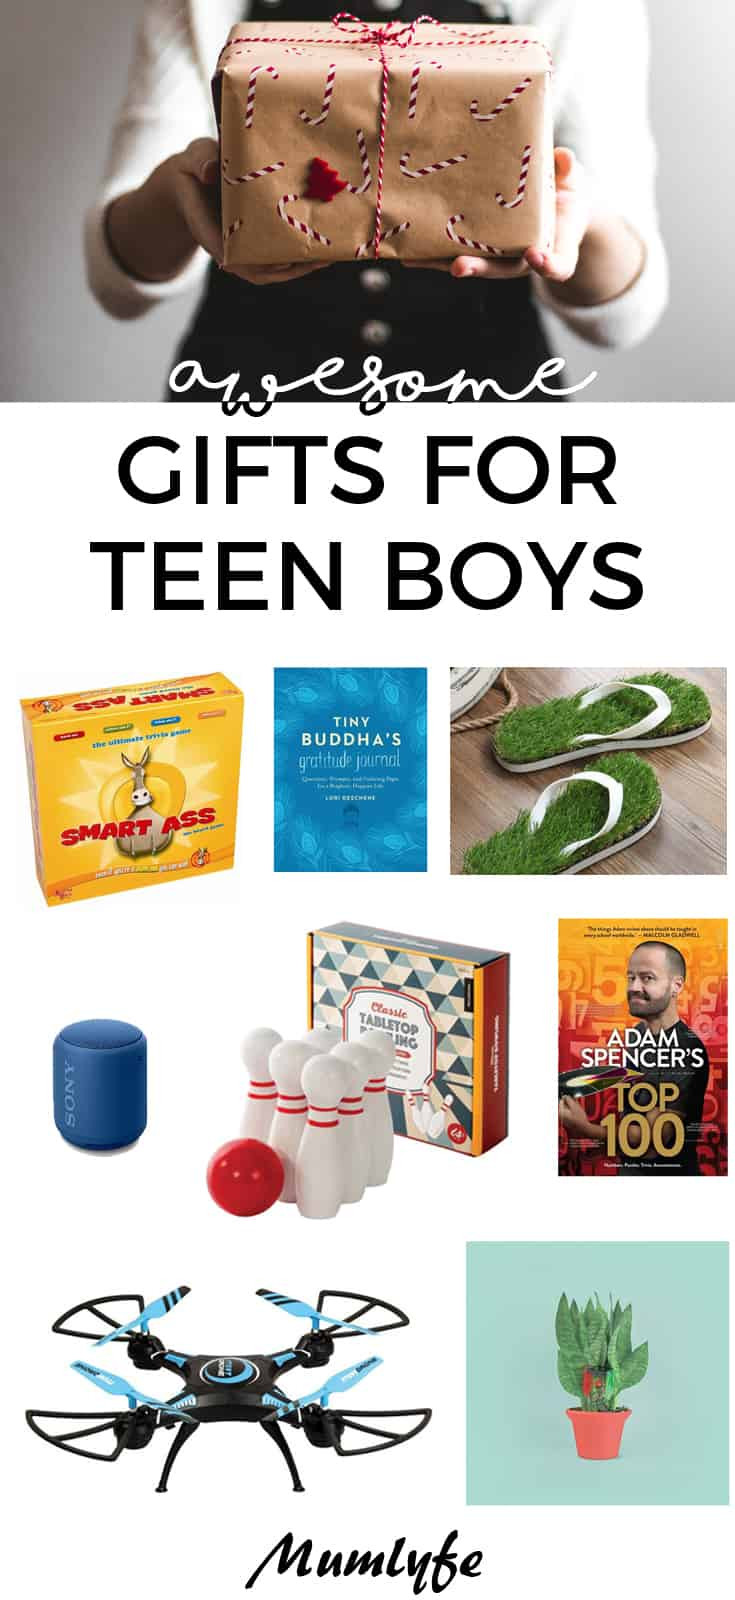 Small Gift Ideas For Boys
 Awesome t ideas for teen boys they will love anything